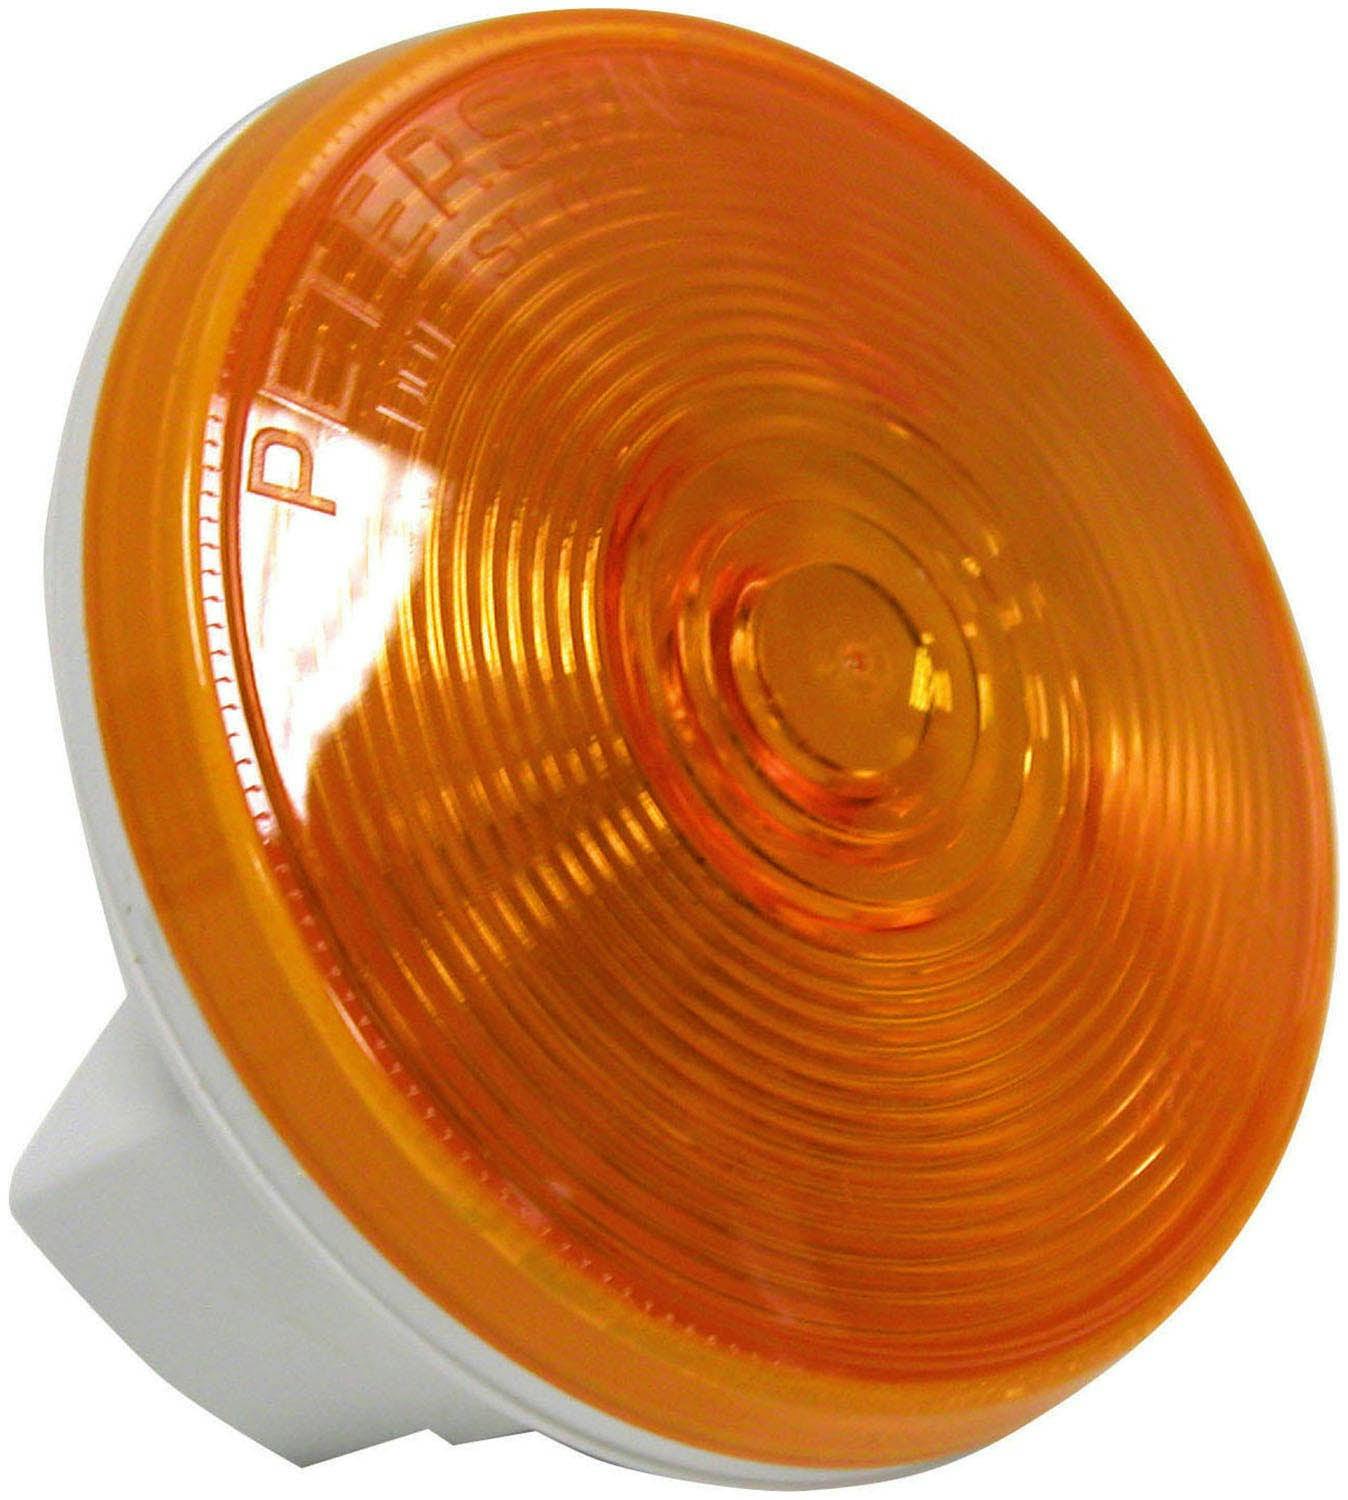 Incandescent Turn Signal, Round, 4", amber (Pack of 12)